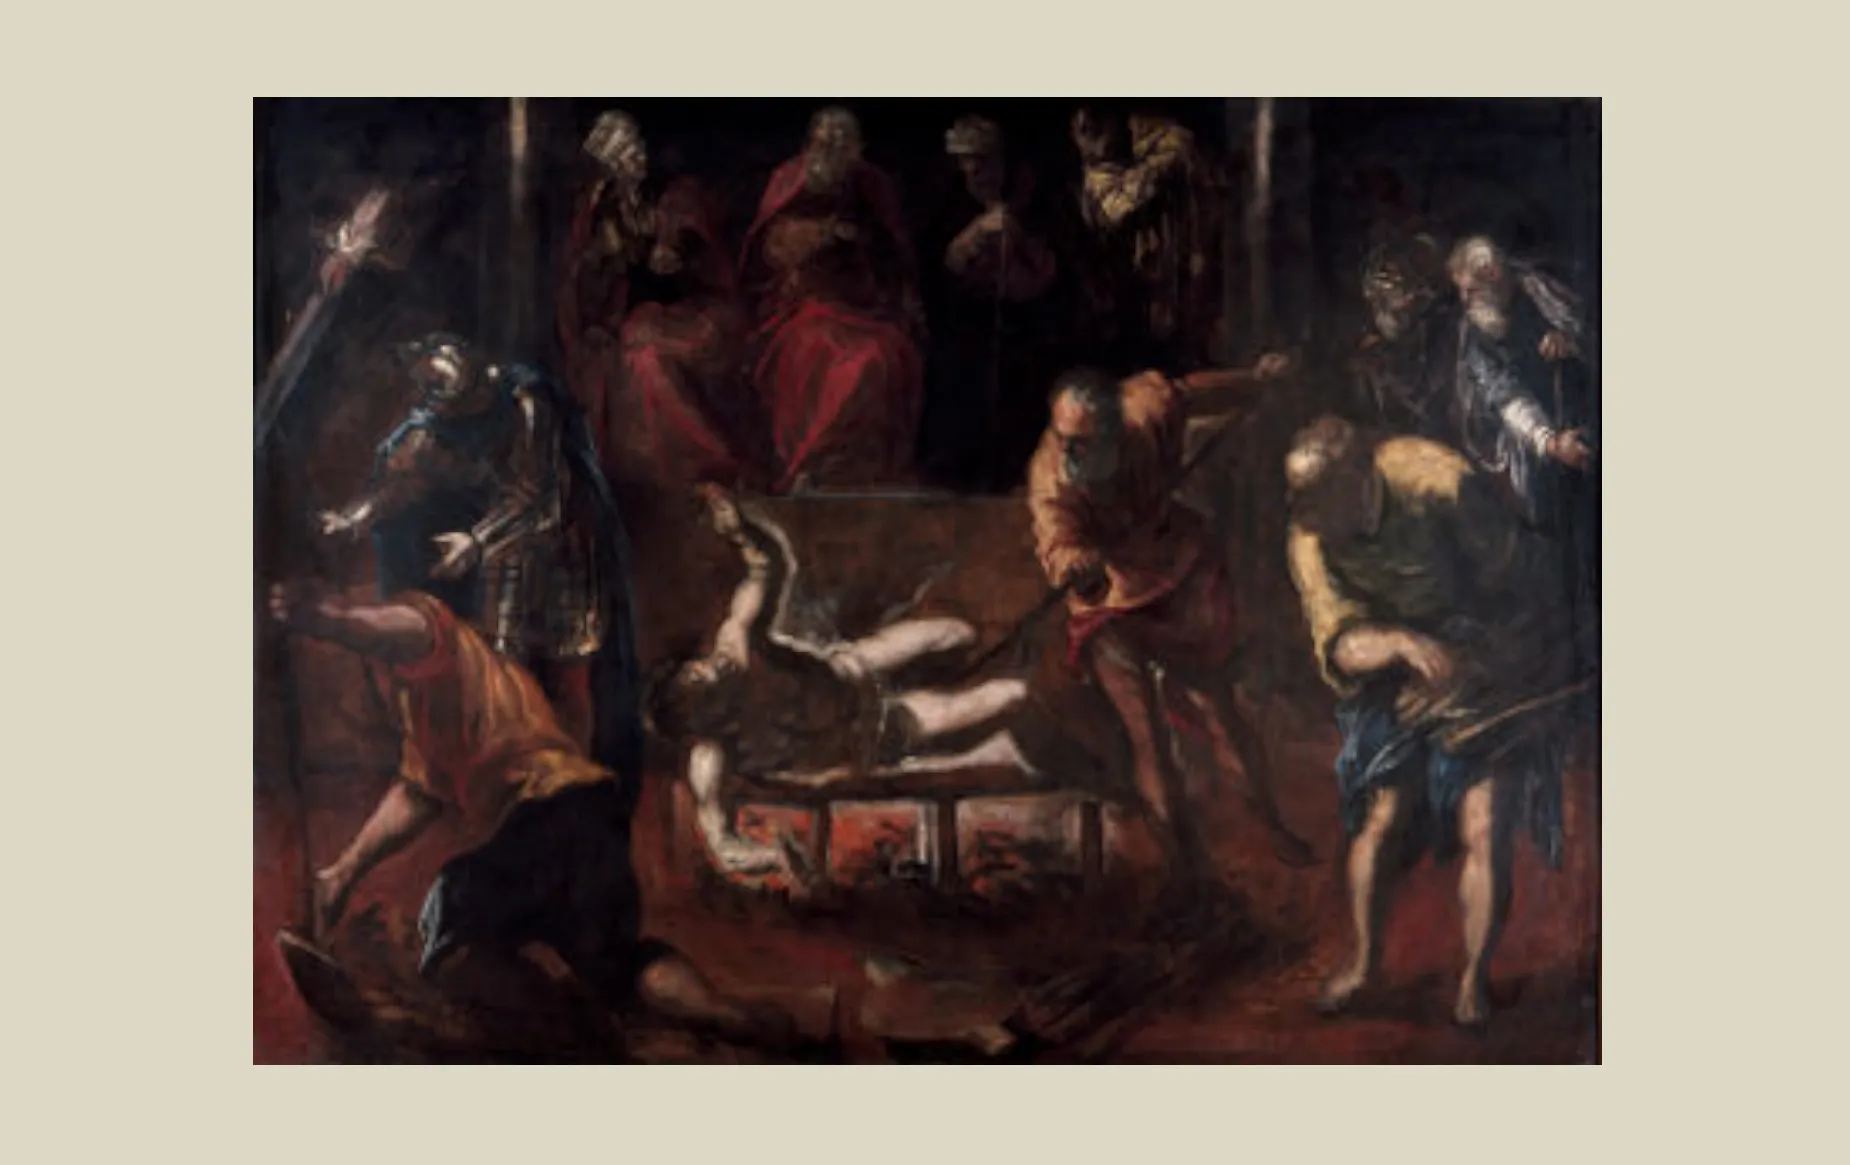  Jacopo Robusti Tintoretto: Martyrdom of St. Lawrence